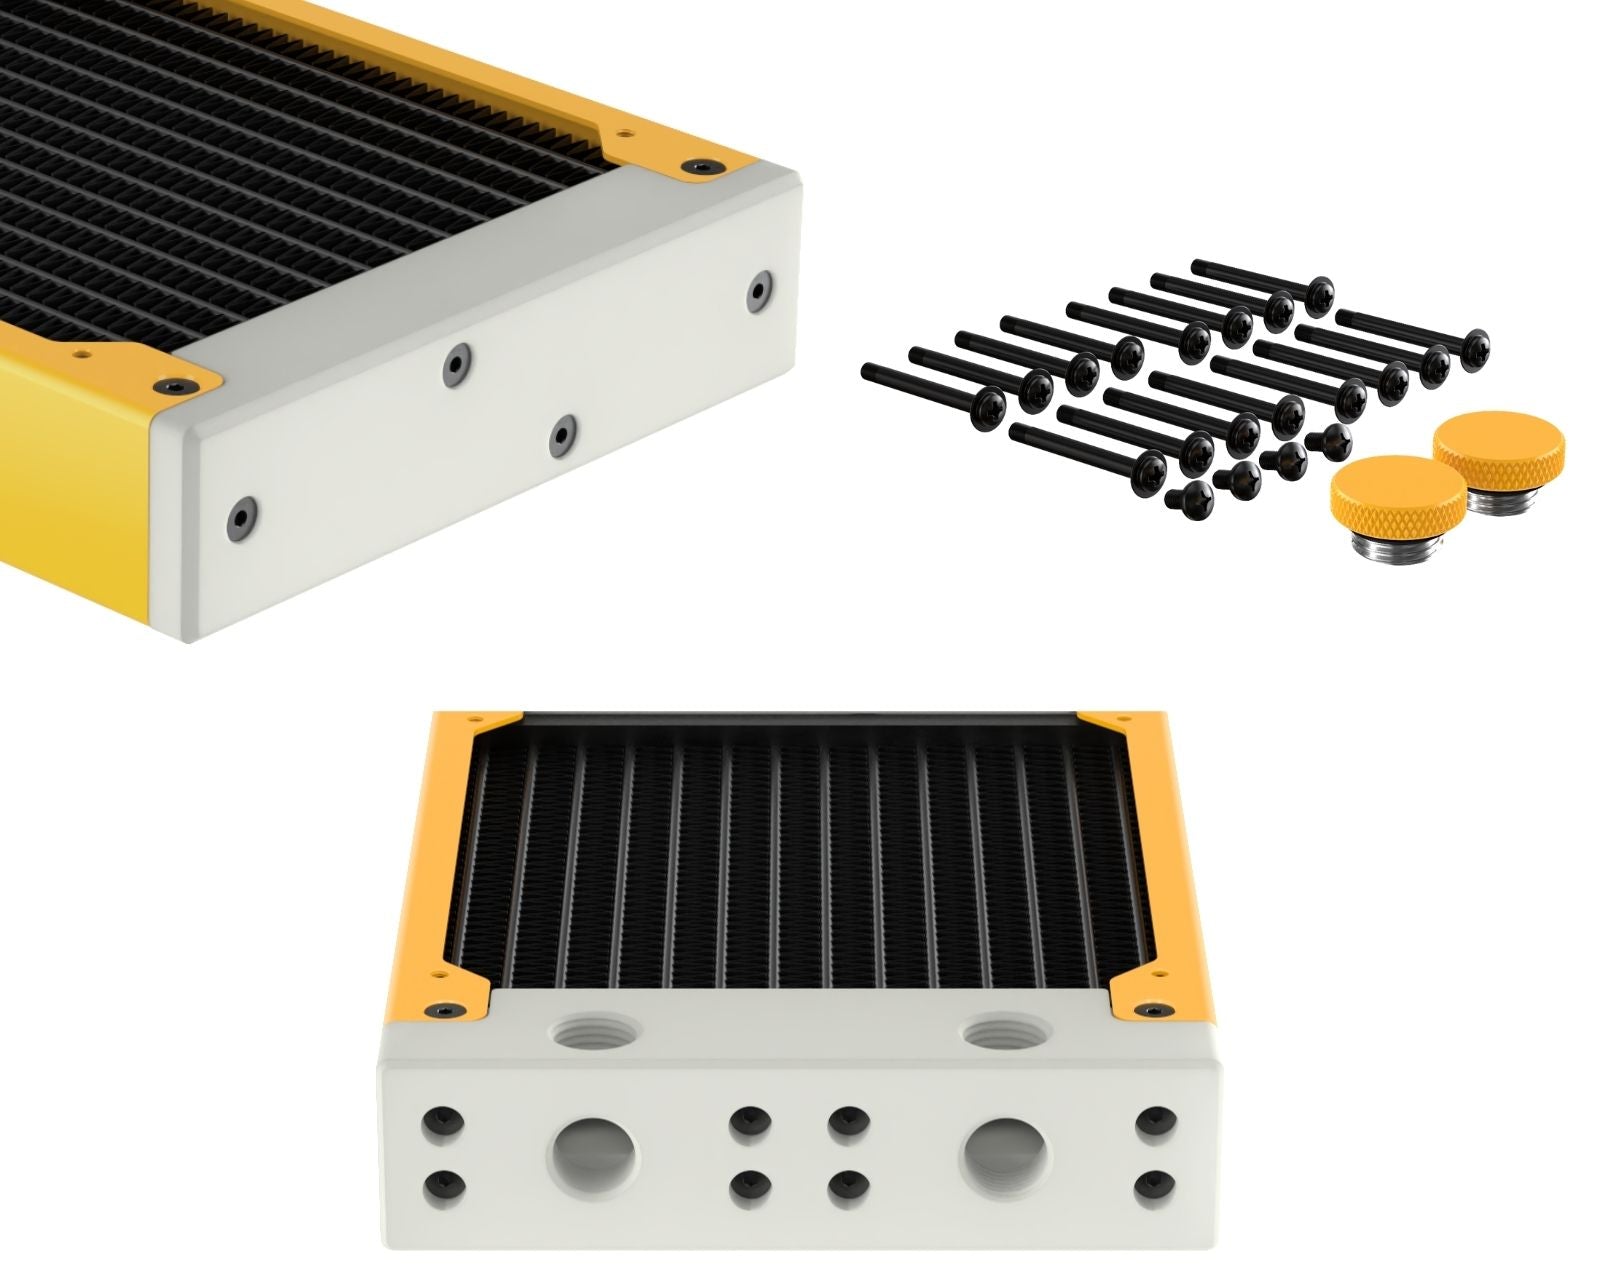 PrimoChill 480SL (30mm) EXIMO Modular Radiator, White POM, 4x120mm, Quad Fan (R-SL-W48) Available in 20+ Colors, Assembled in USA and Custom Watercooling Loop Ready - Yellow